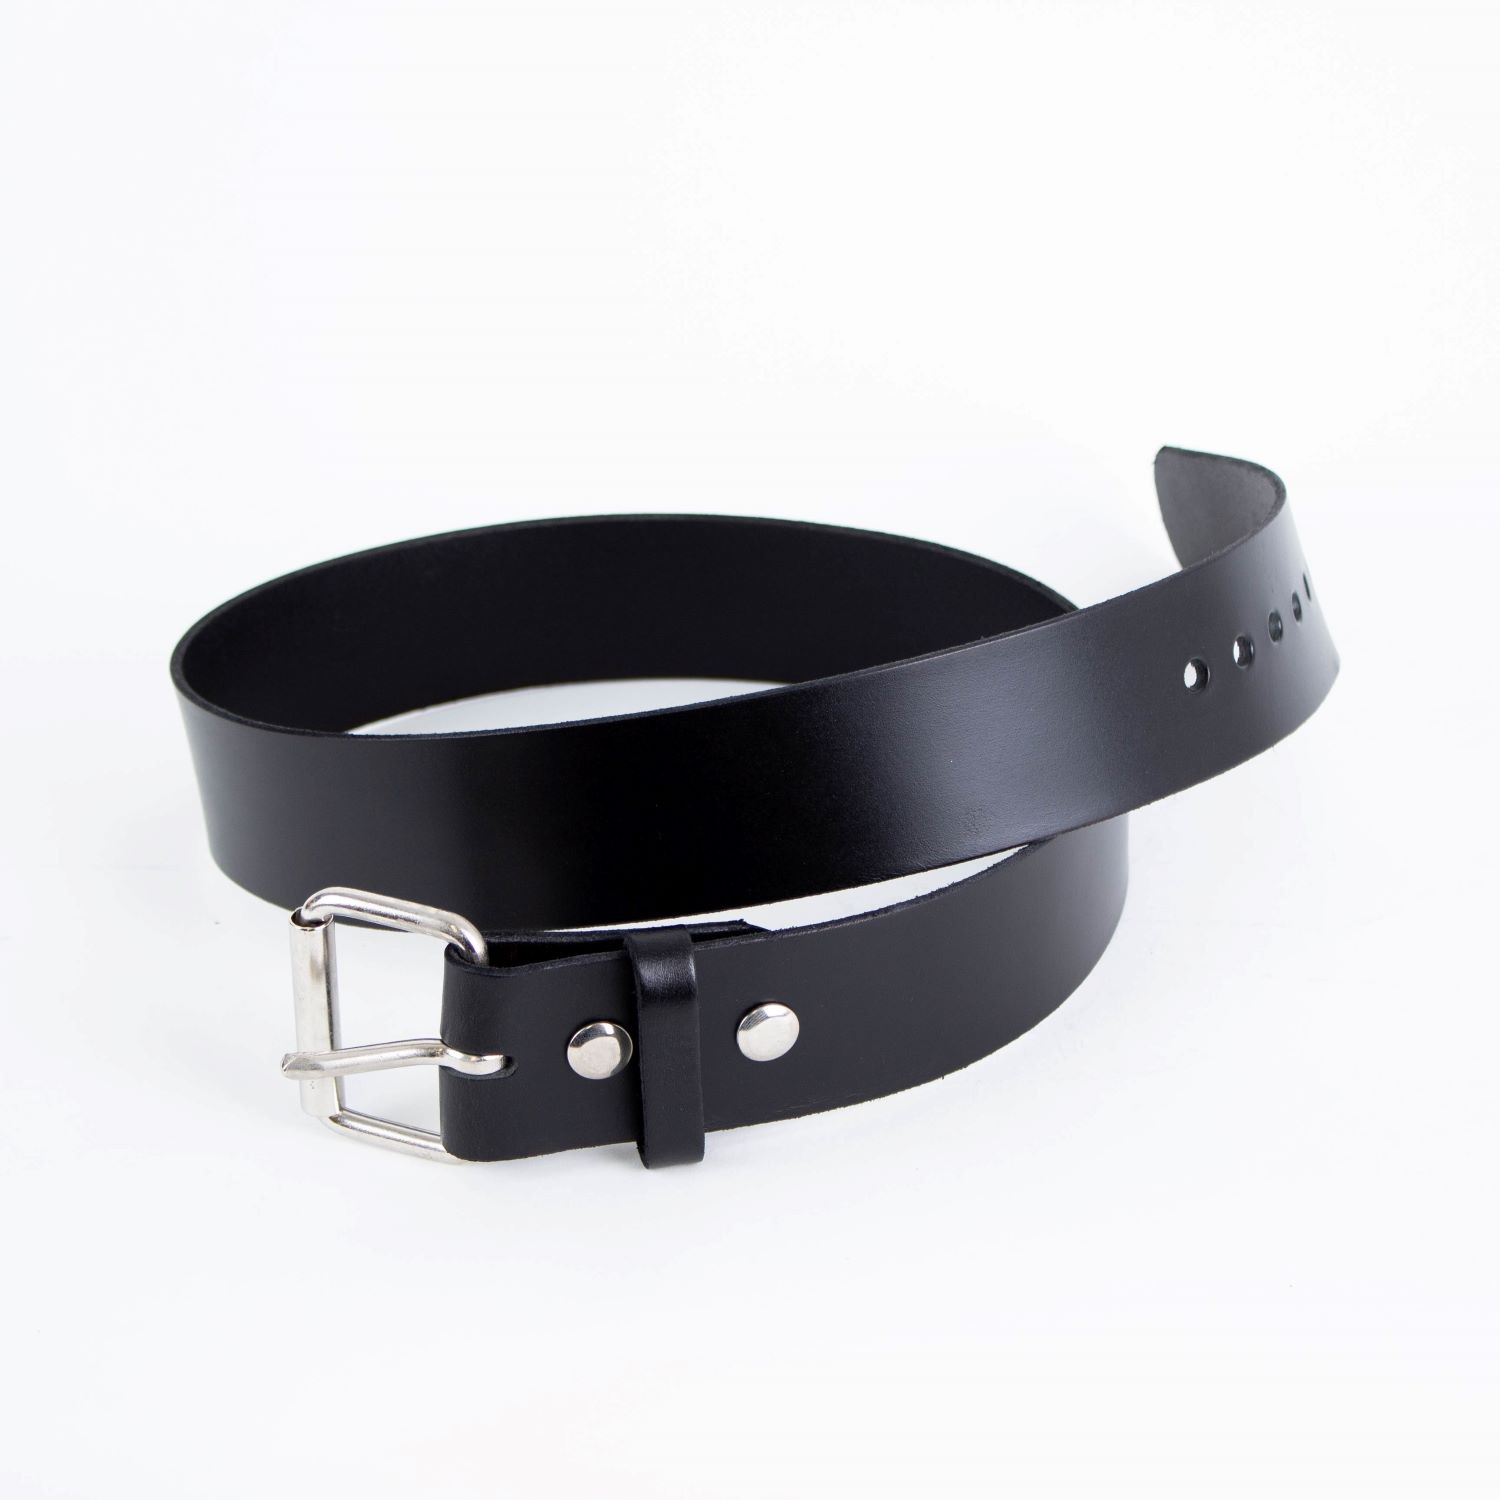  LANMU Replacement Belts Compatible with Black and